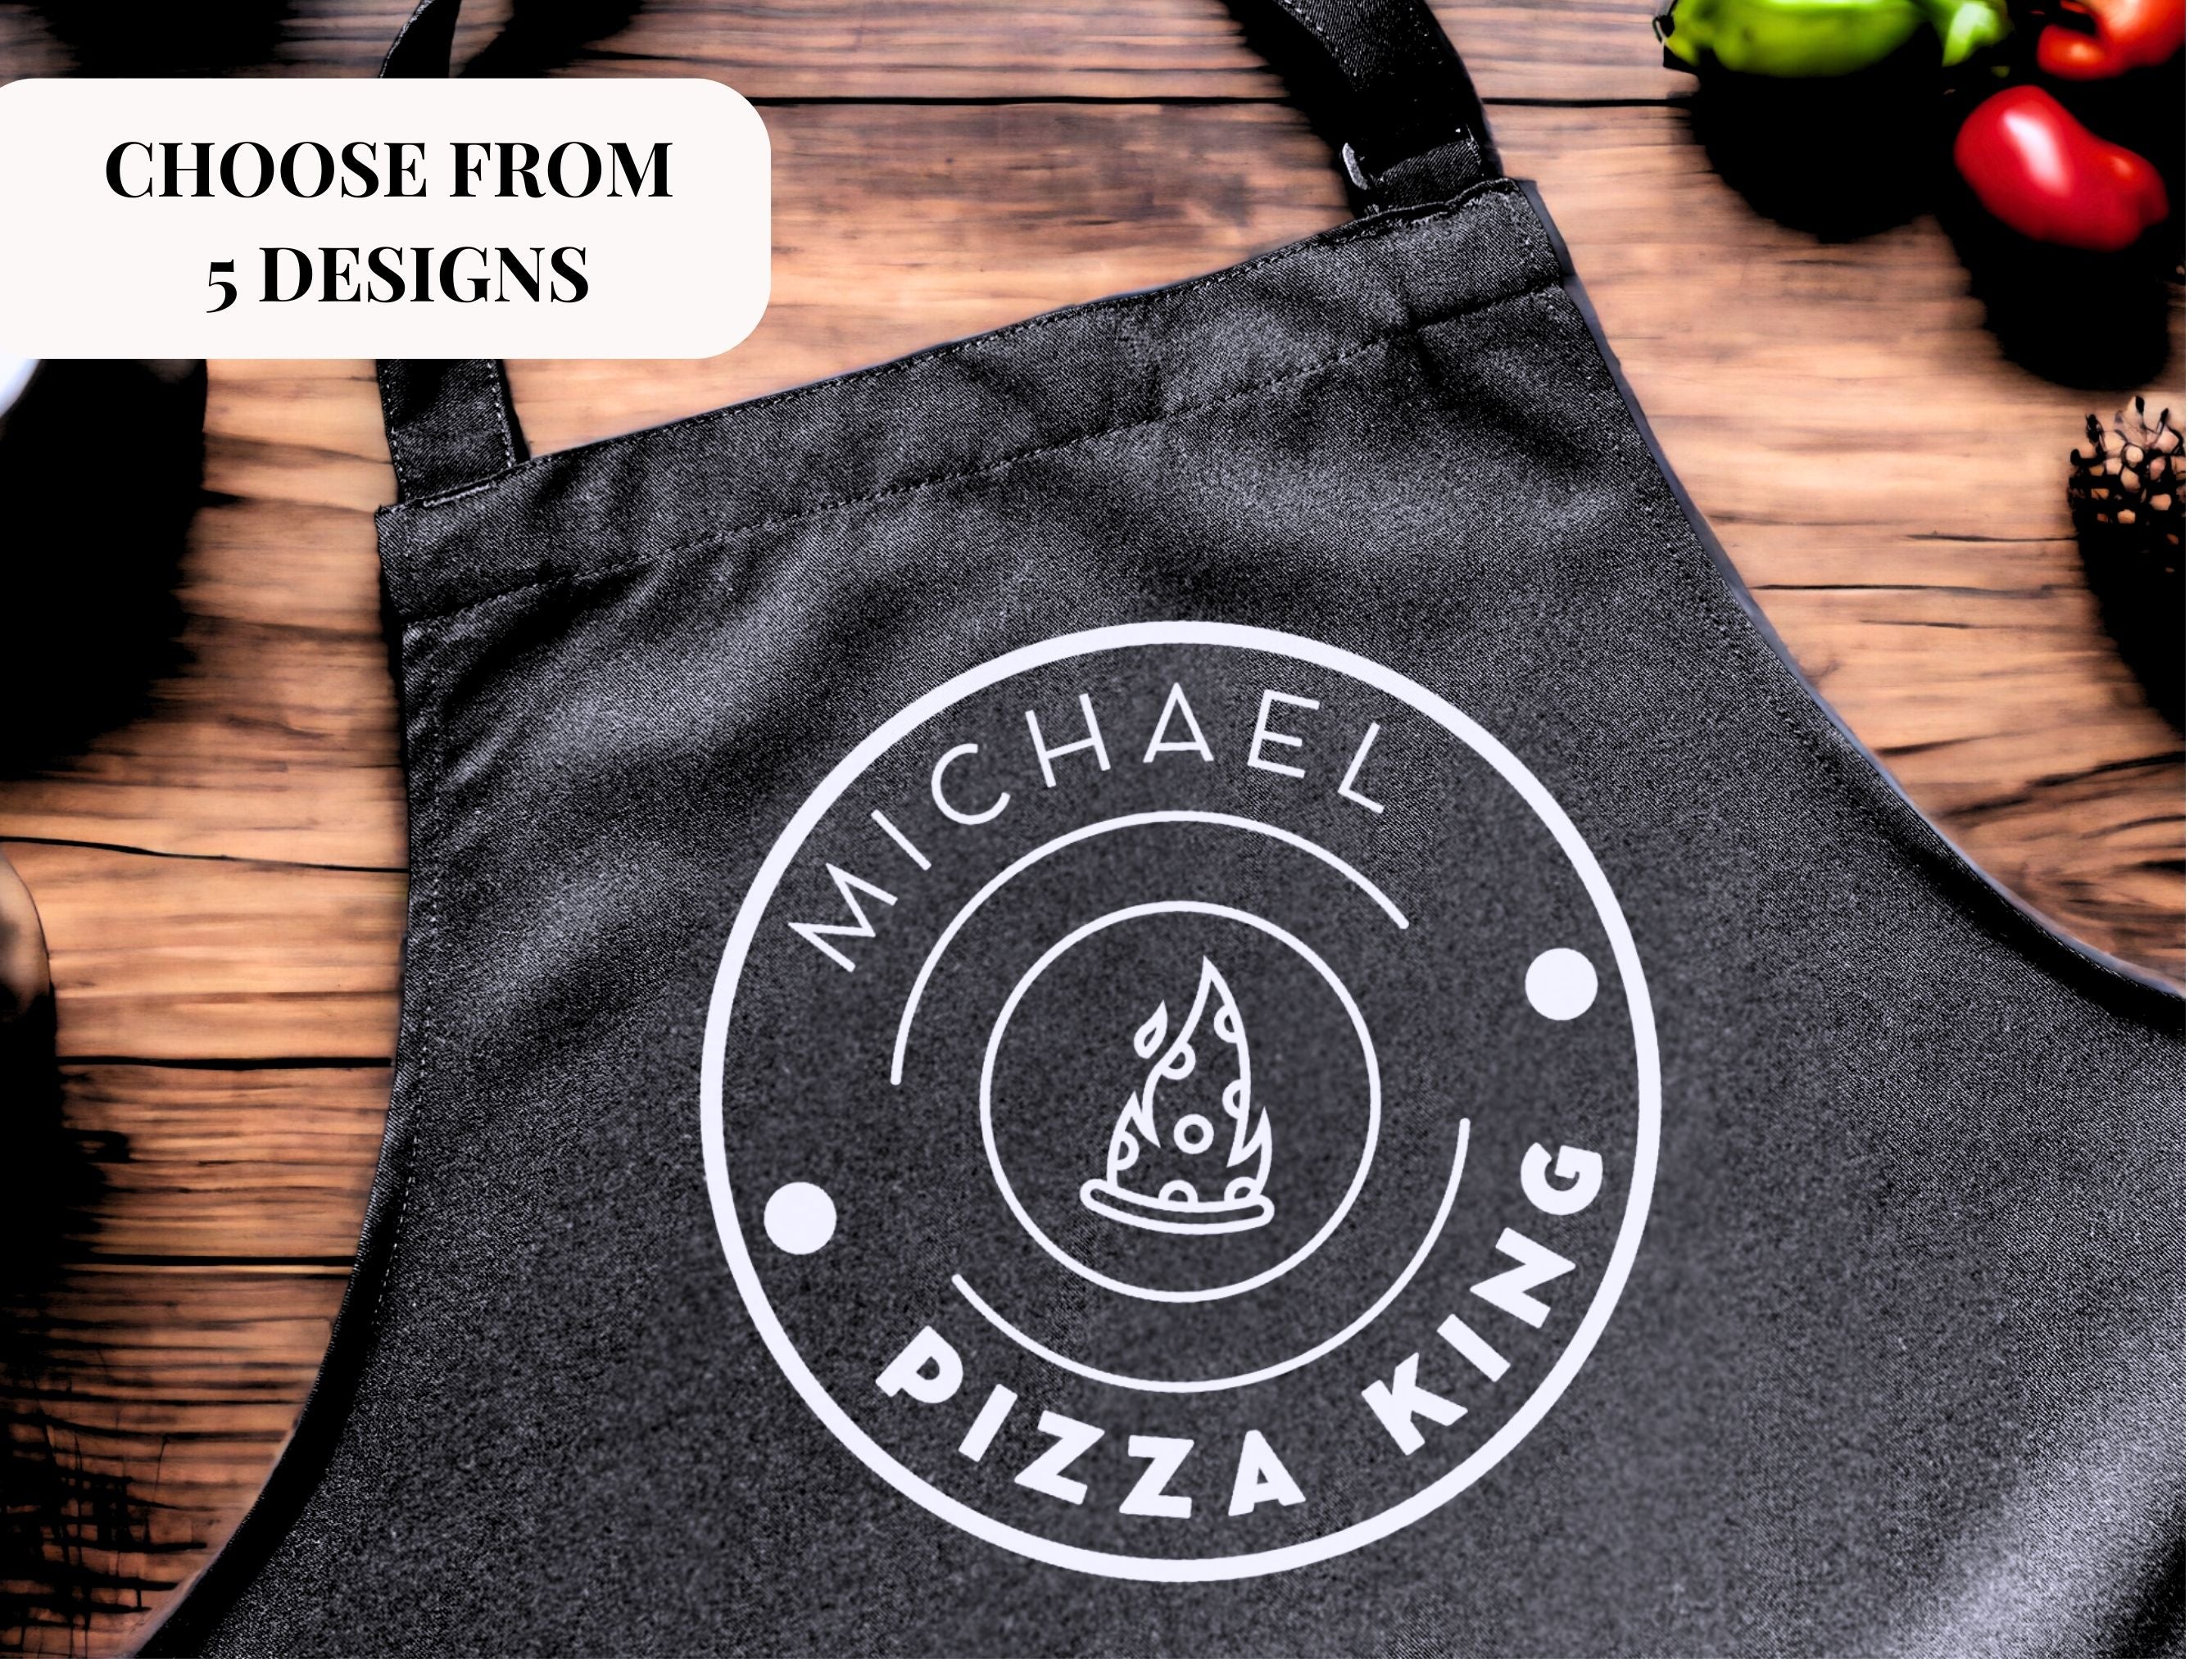 Personalised pizza apron with name